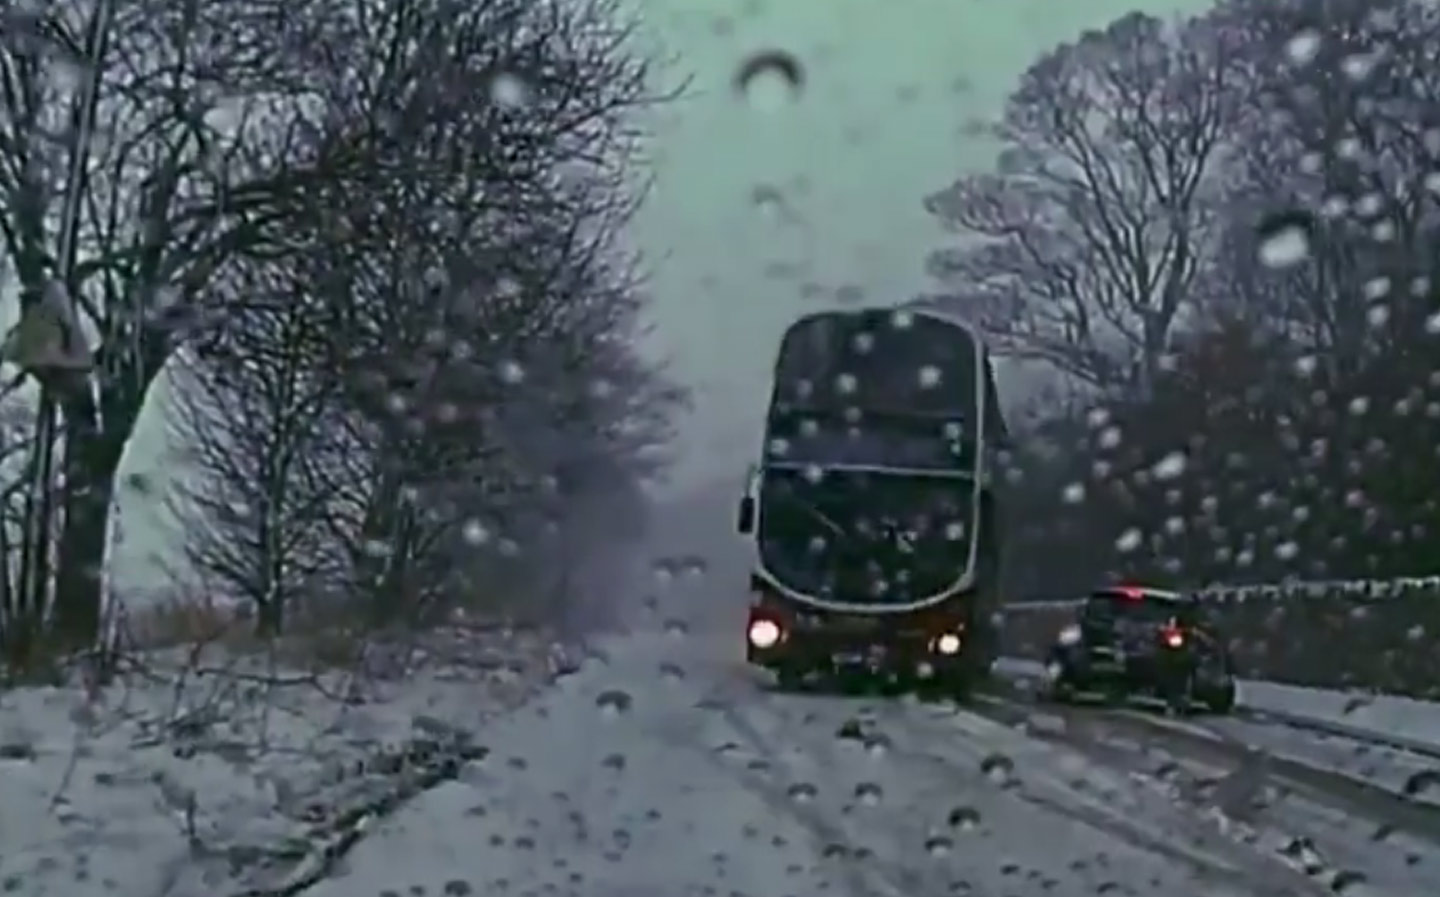 Hero bus driver narrowly avoids car in snow as The Beast from the East and Storm Emma cause chaos on British roads